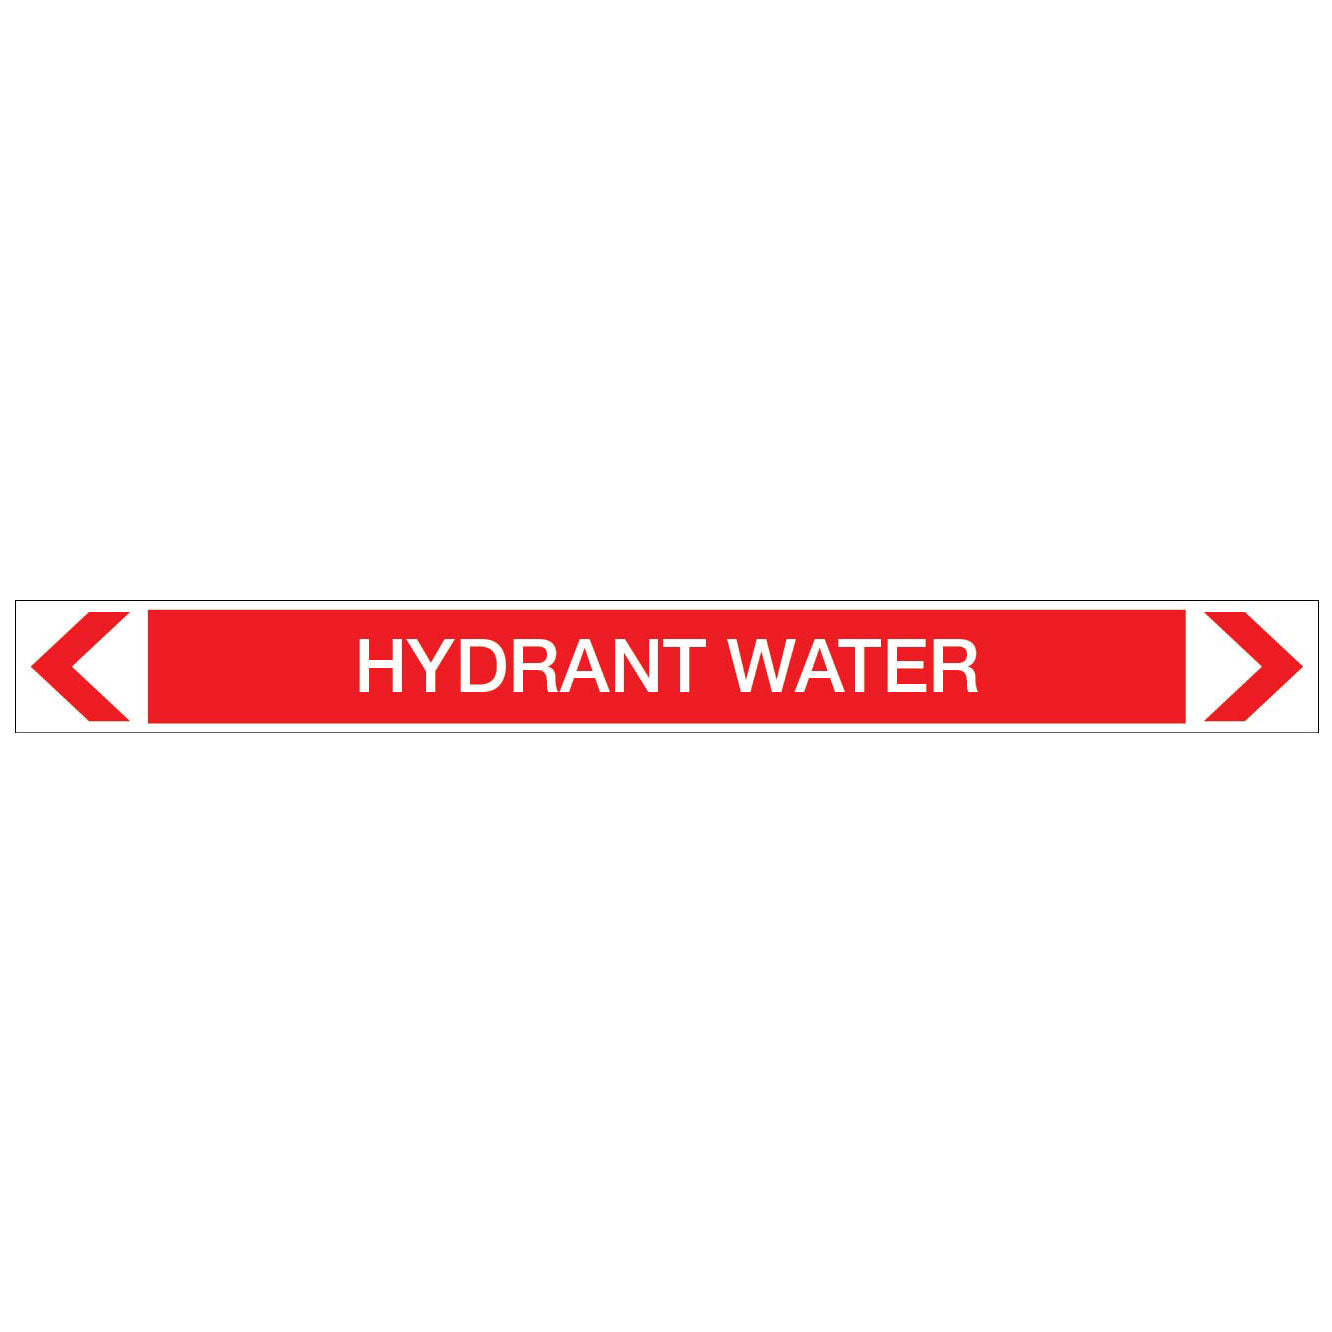 Fire Protection - Hydrant Water - Pipe Marker Sticker